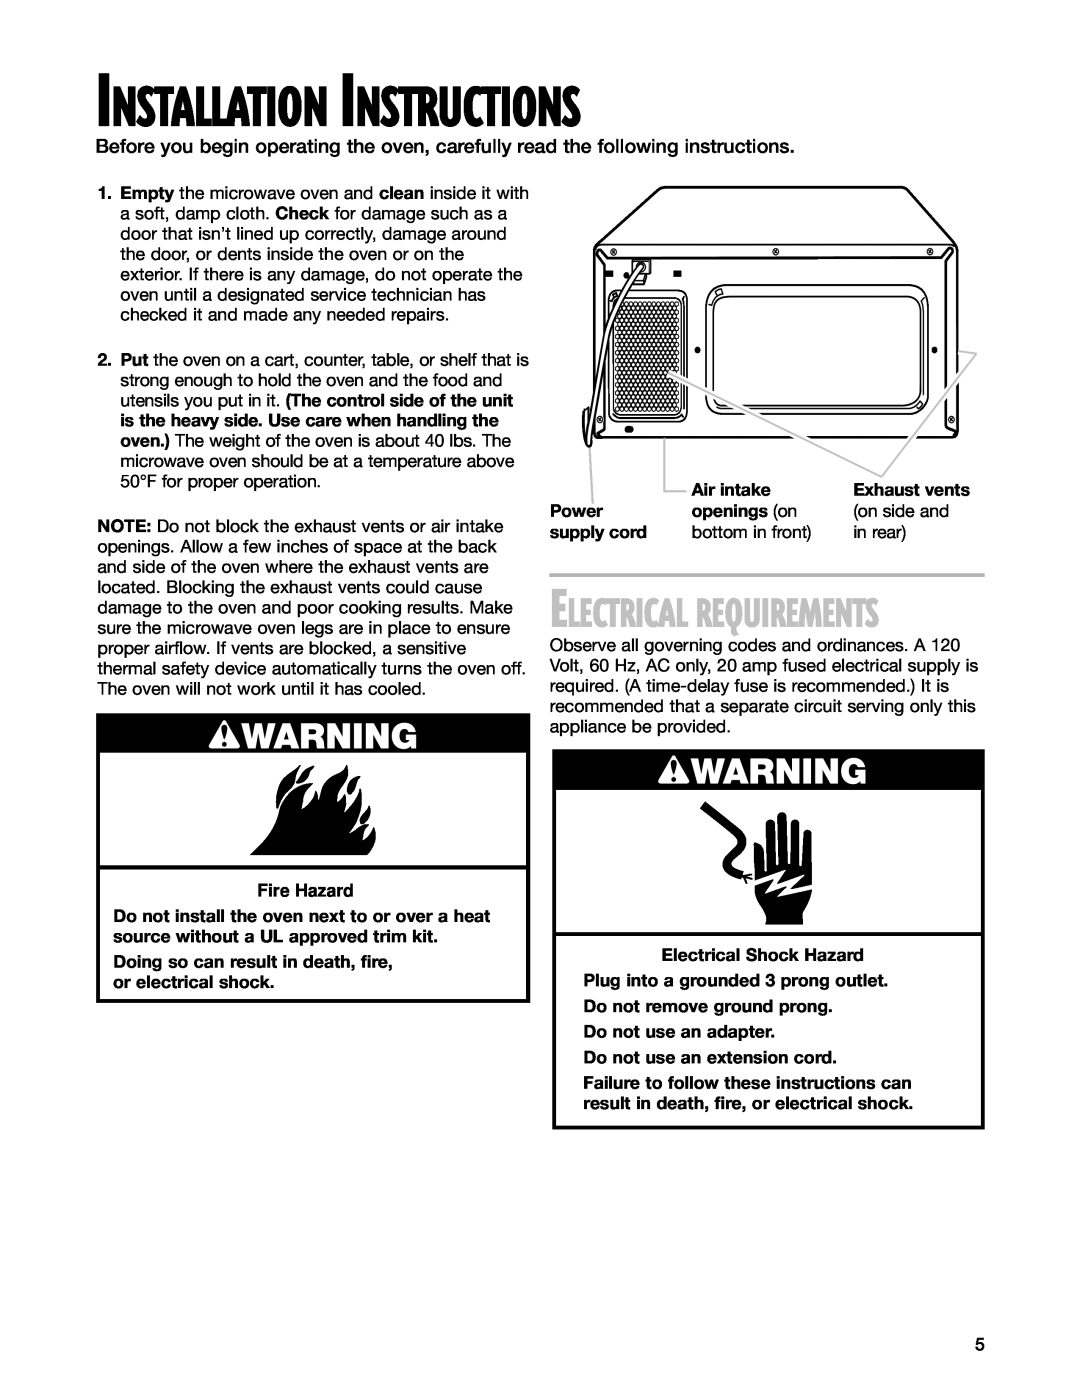 Whirlpool MT1100SH installation instructions Installation Instructions, wWARNING, Electrical Requirements 